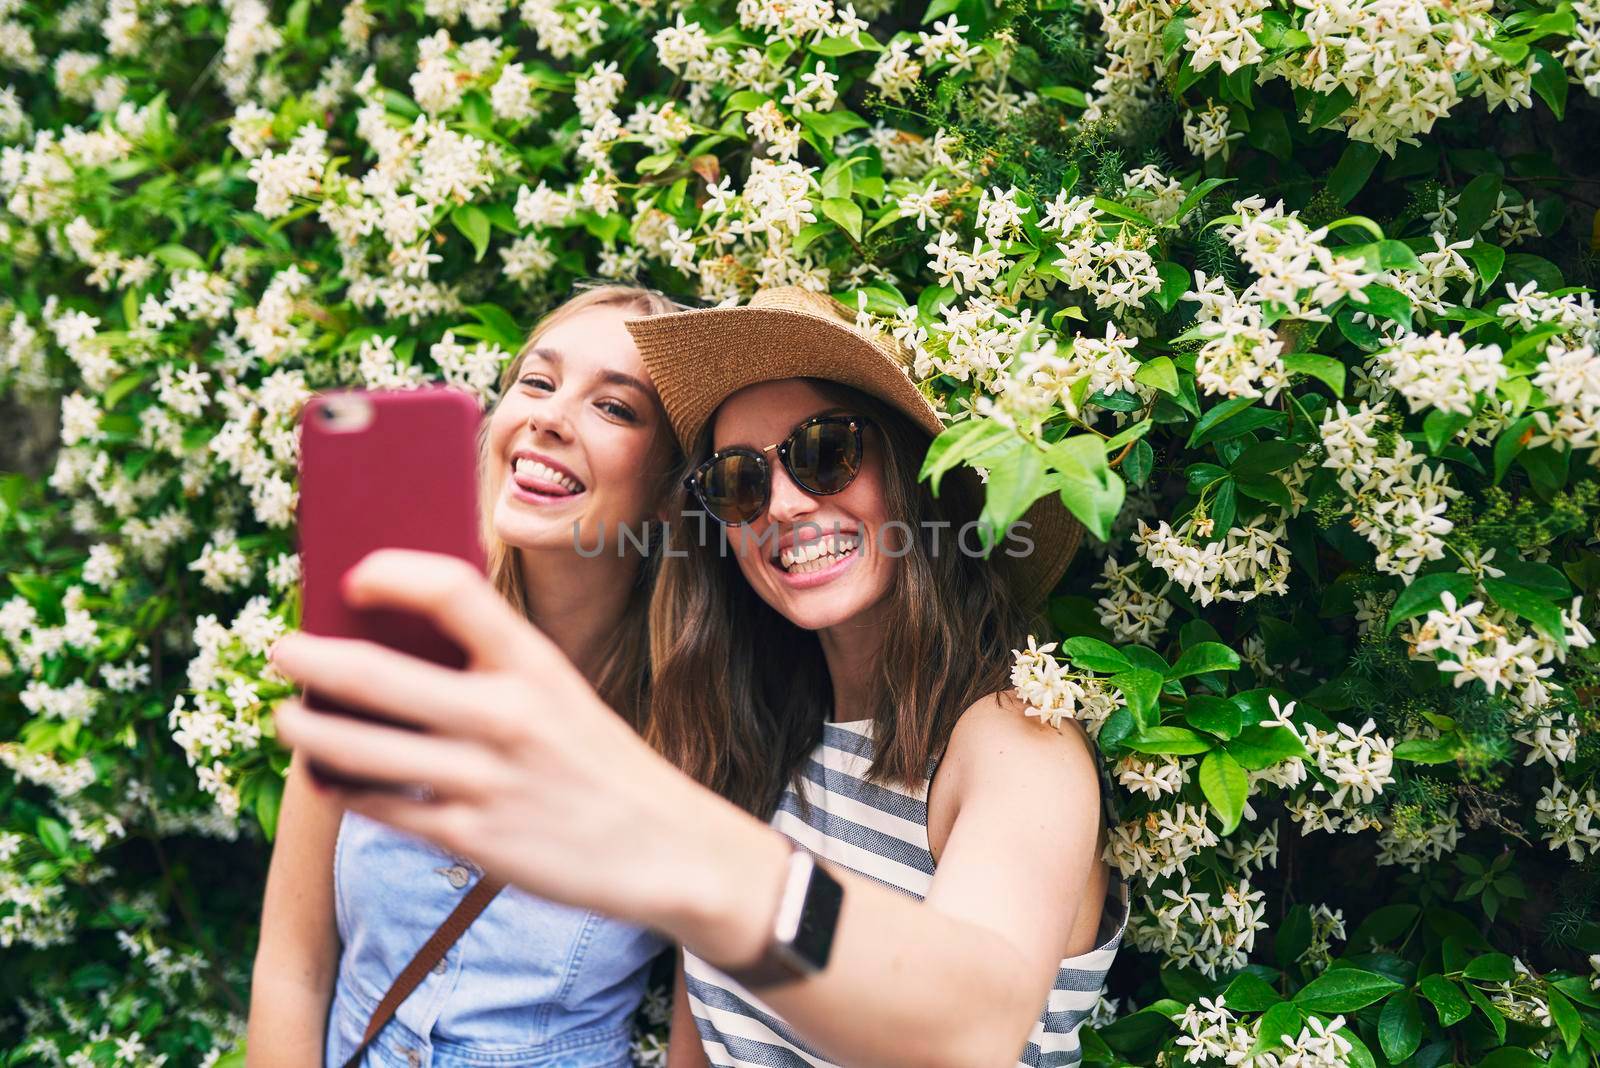 Two friends taking selfies on summer vacation. Girl friends on travel adventure taking photos for social media with smartphone.